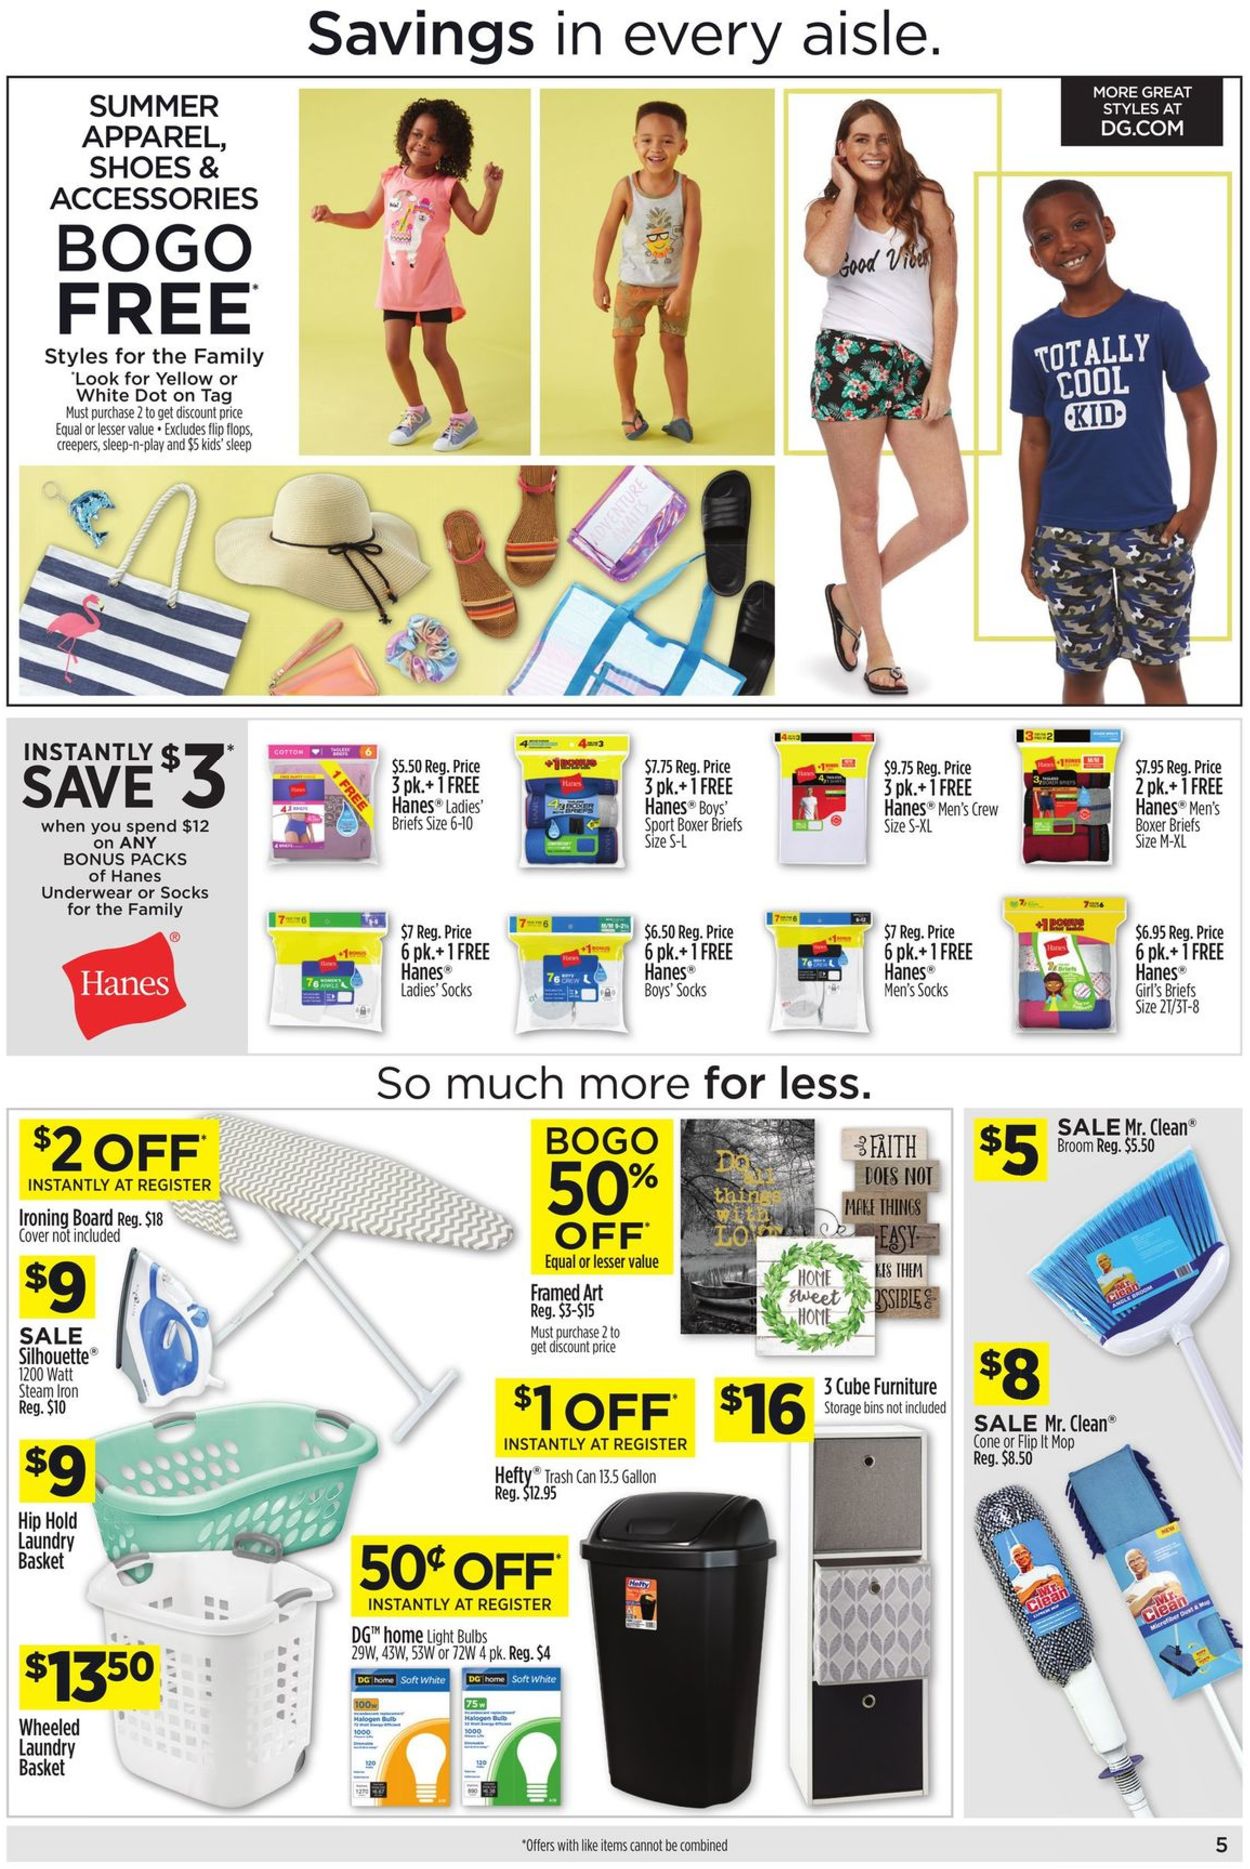 Catalogue Dollar General from 08/04/2019